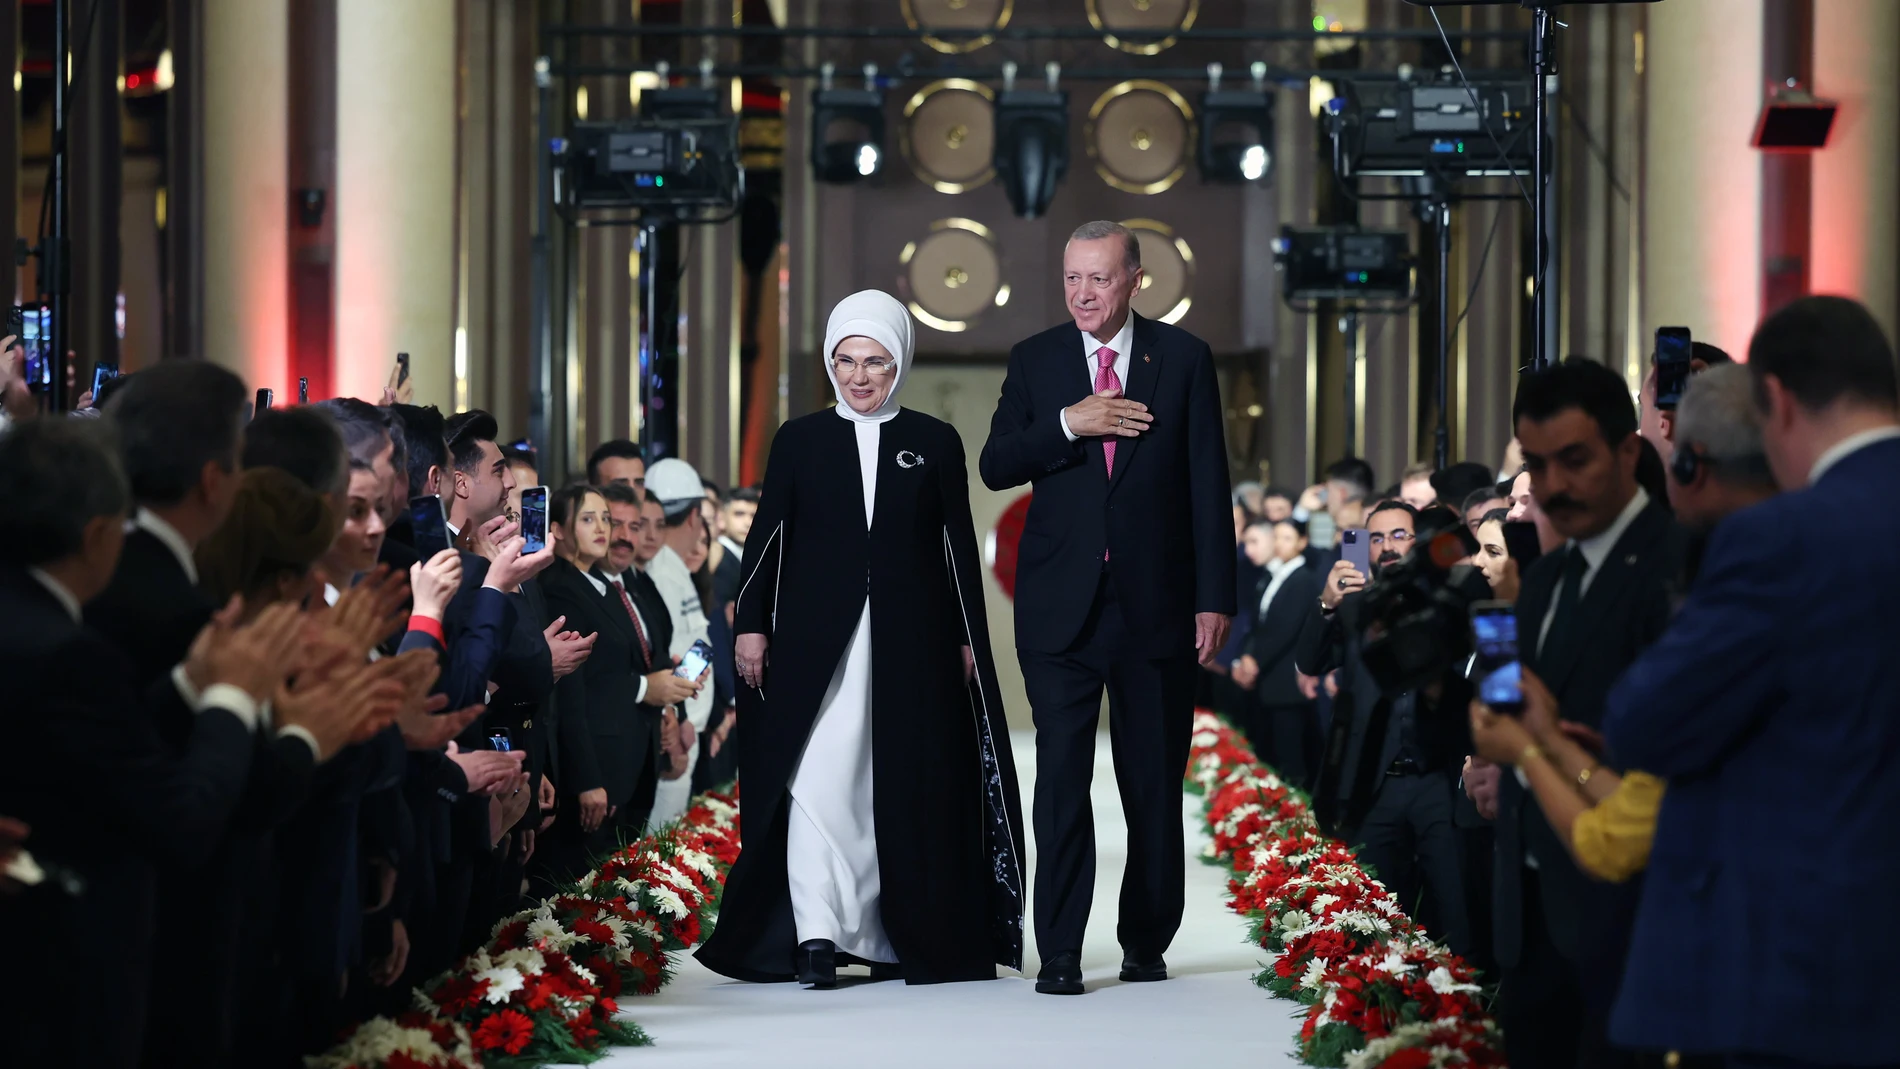 Ankara (Turkey), 03/06/2023.- A handout photo made available by the Turkish Presidential Press Office shows Turkish President Recep Tayyip Erdogan (R) and his wife Emine Erdogan (L) attending his inauguration ceremony at the presidential palace in Ankara, Turkey, 03 June 2023. Erdogan won Turkey's presidential run-off on 28 May and was re-elected president, according to Turkey's Supreme Election Council. (Turquía) EFE/EPA/TURKISH PRESIDENTIAL PRESS OFFICE / HANDOUT HANDOUT EDITORIAL USE ONLY/NO SALES 